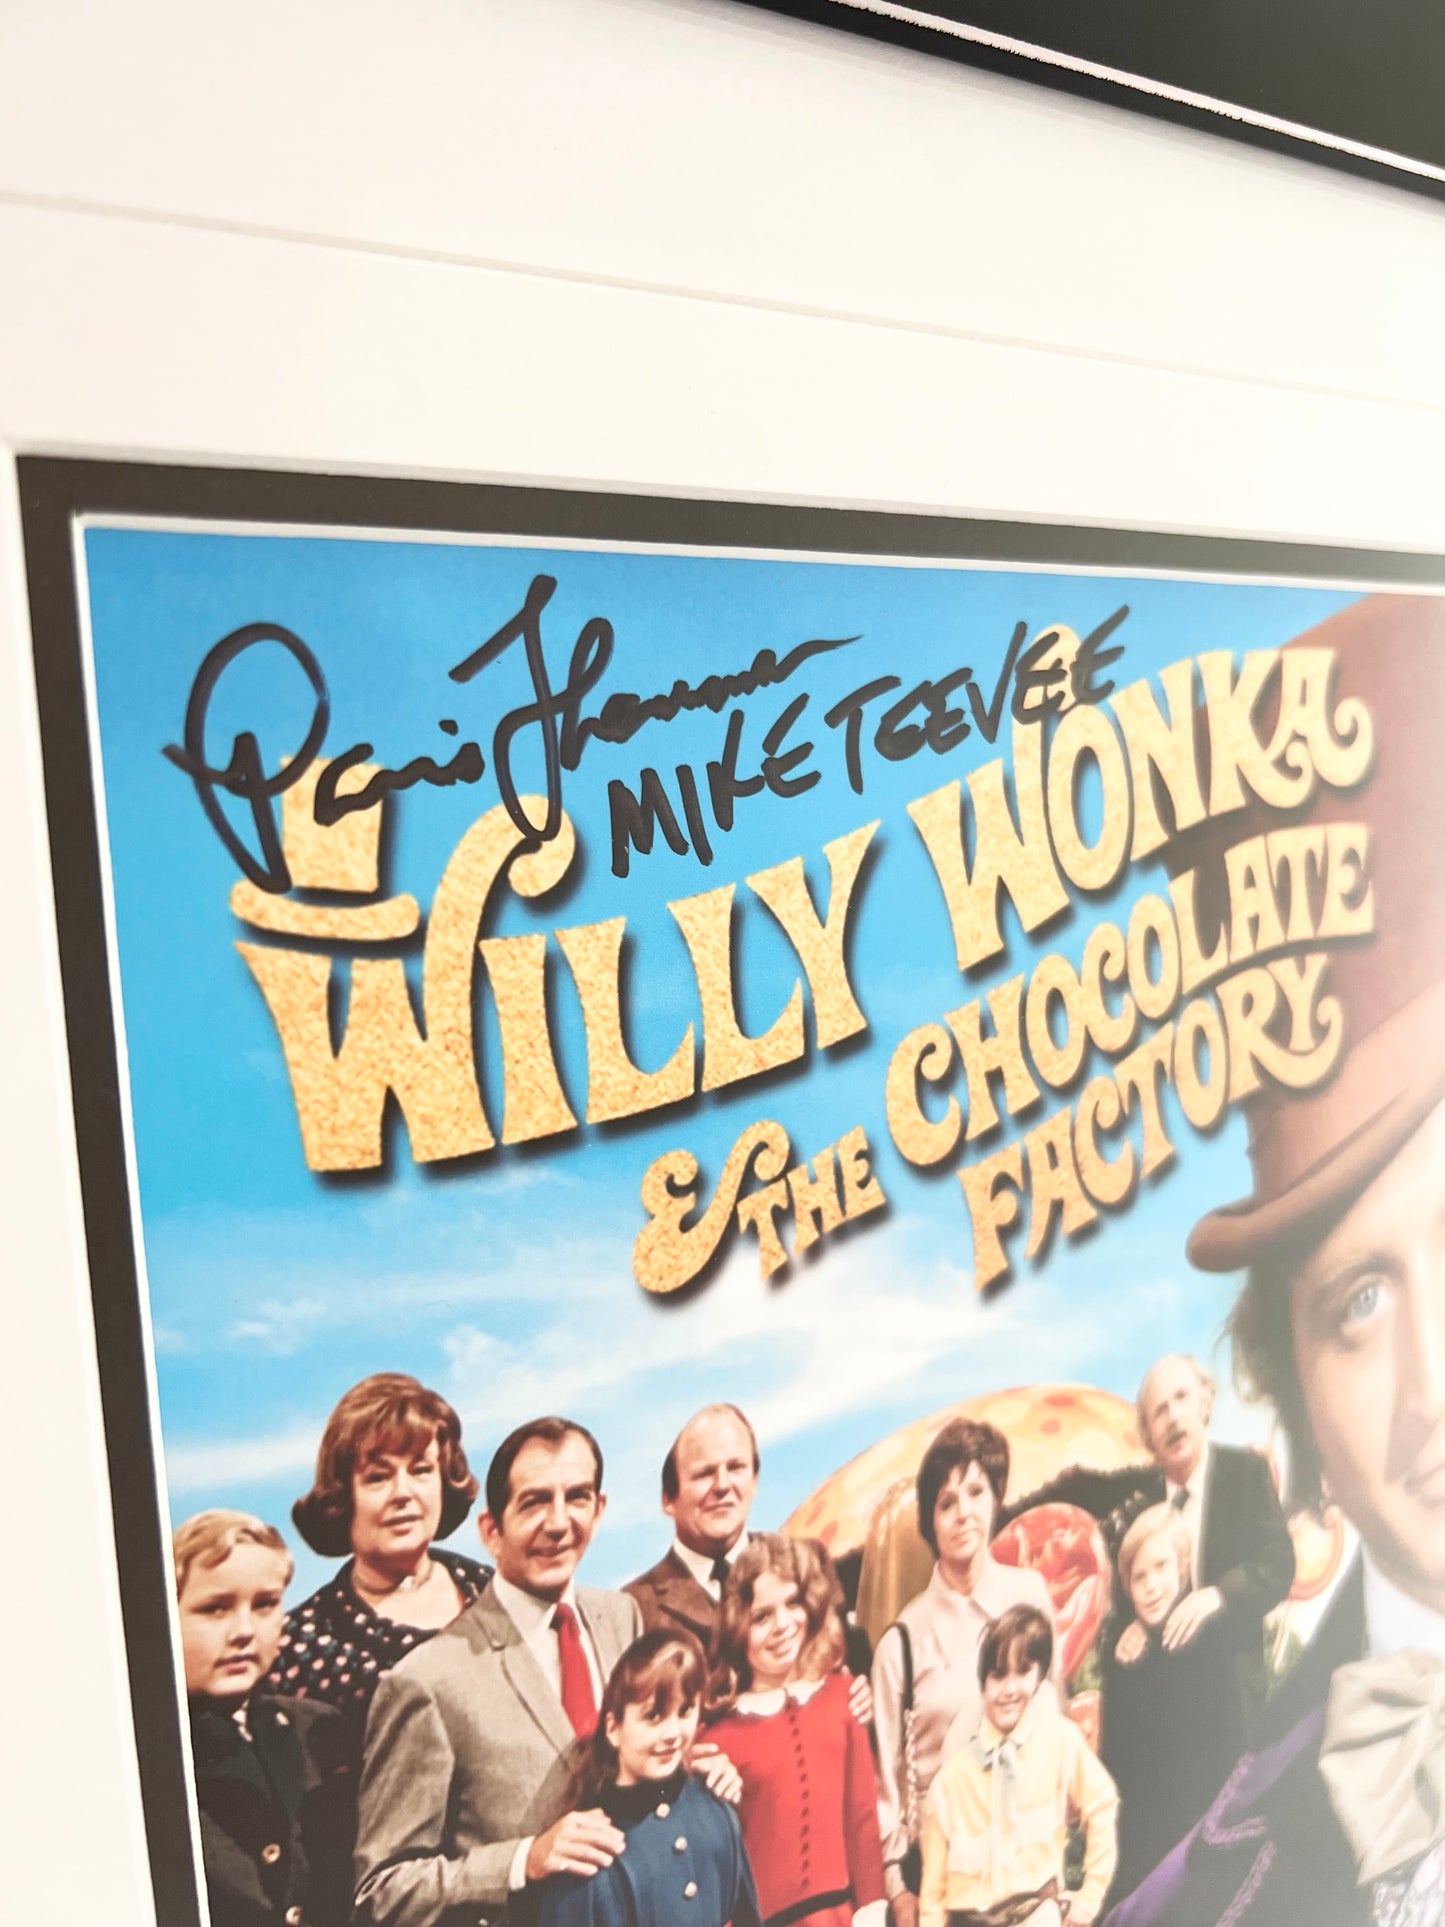 Paris Themmen Signed Autograph Willy Wonka Inscribed Mike TeeVee Rare with COA